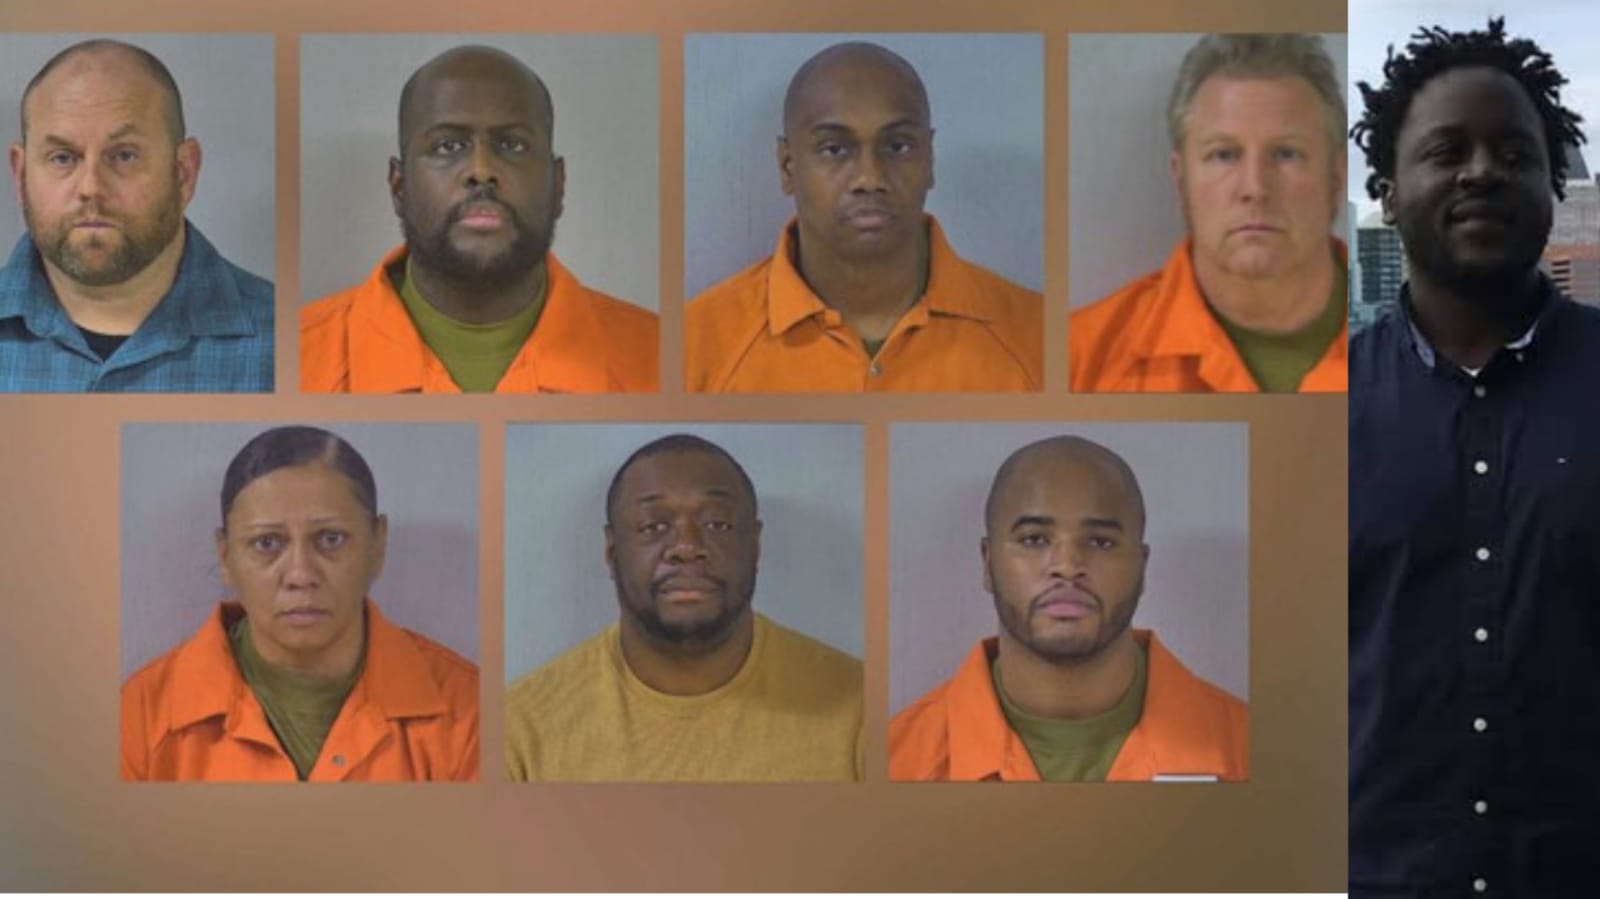 7 deputy sheriffs charged with second degree murder of Irvo Otieno in Virginia